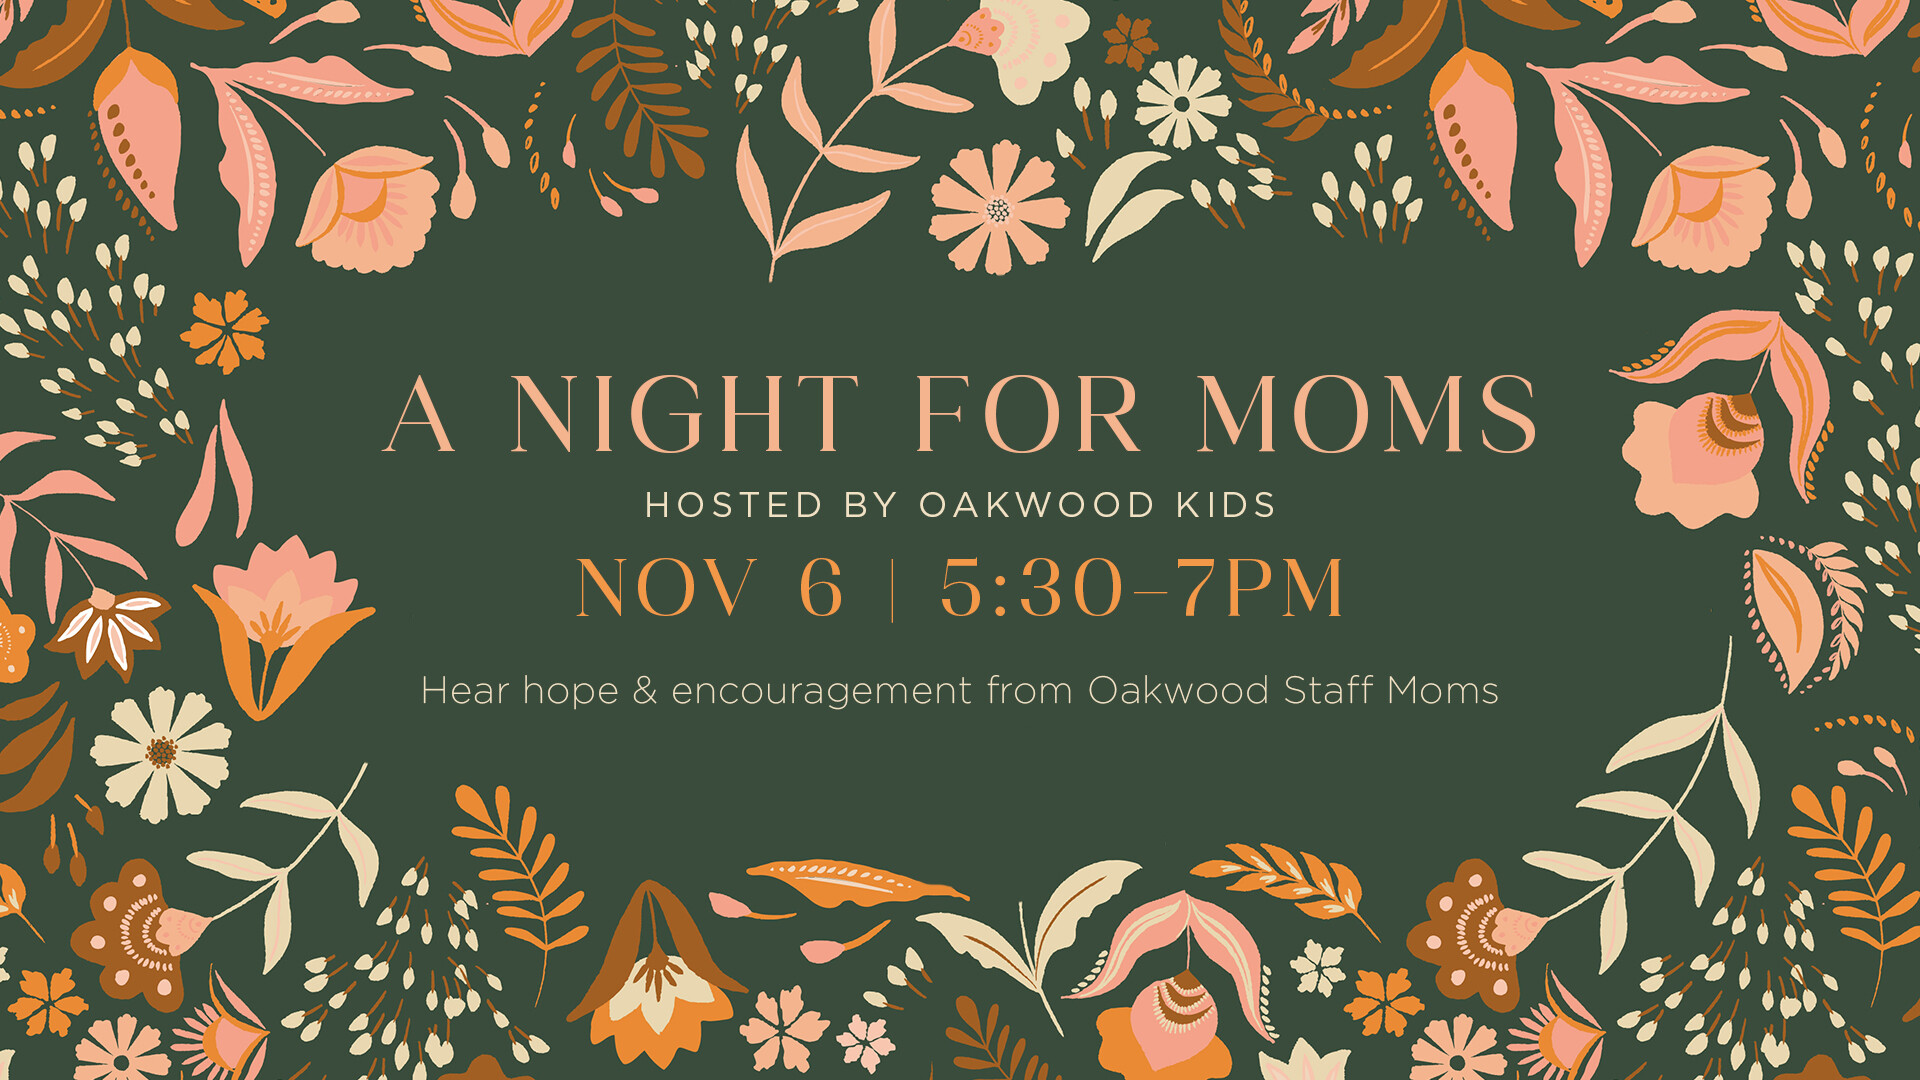 A Night for Moms